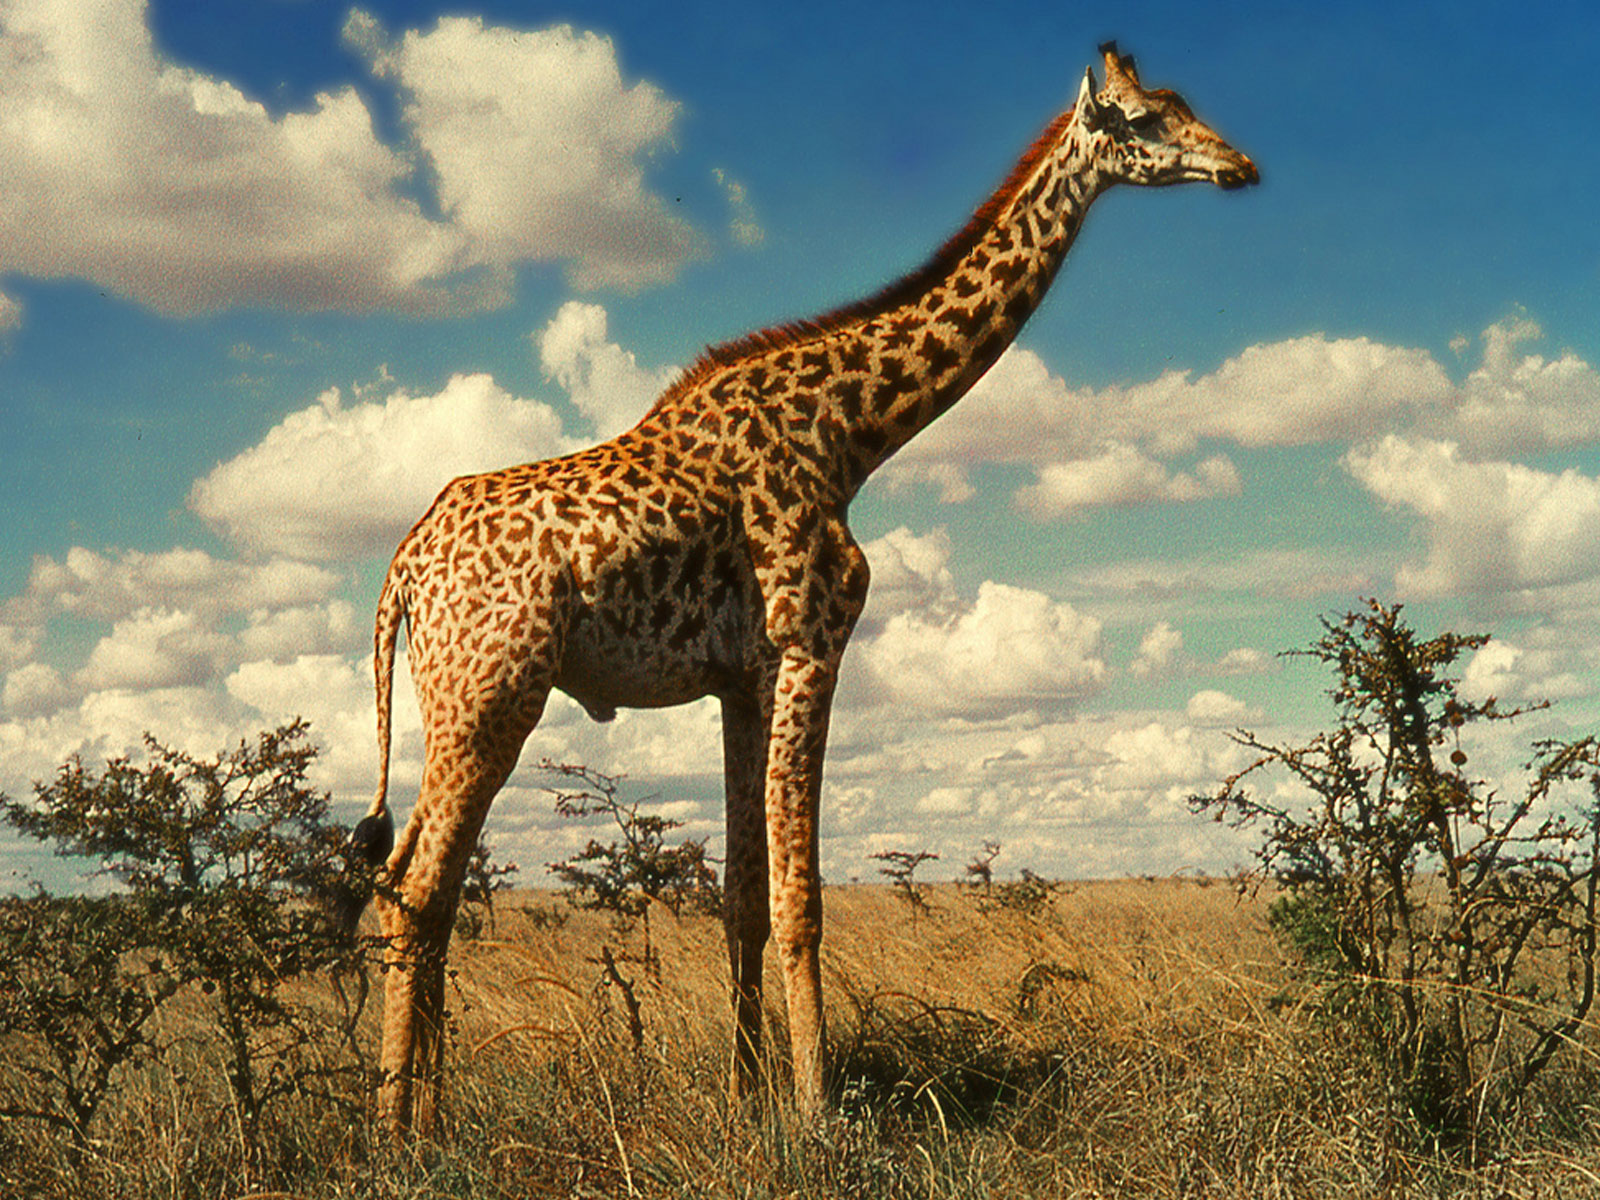 giraffe-descprition-and-facts